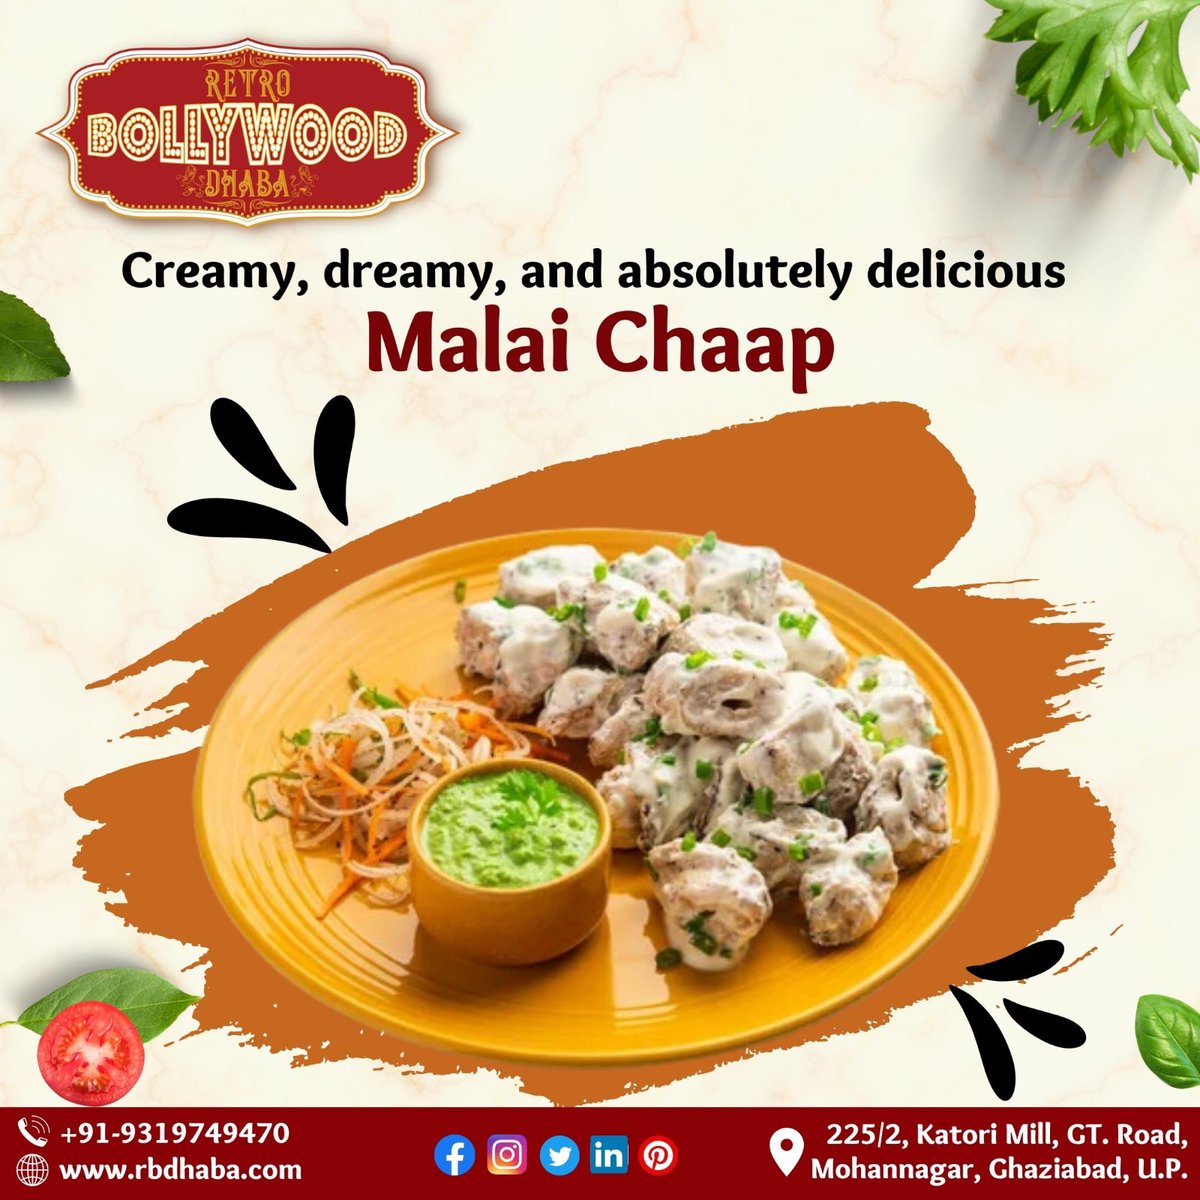 'Experience the creamy indulgence of Malai Chaap at Retro Bollywood Dhaba! 🌿🍢'

Delight in the succulent and marinated soya chaap, cooked to perfection in a luscious and aromatic malai (cream) gravy.

#RBD #MalaiChaap #CreamyDelights #BollywoodFlavors  #BollywoodFoodCravings